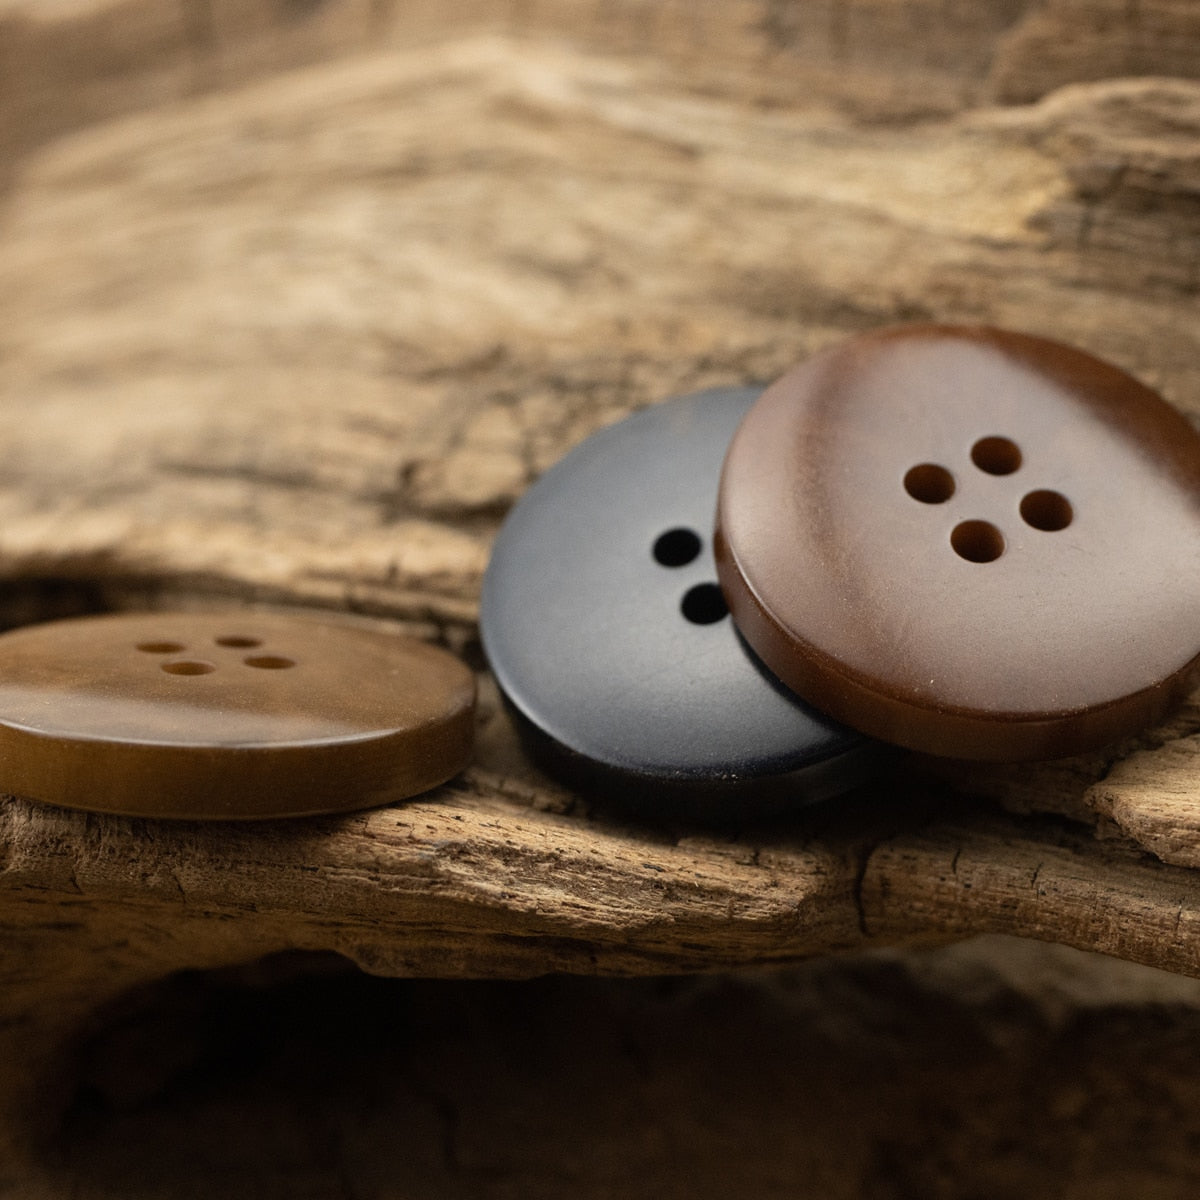 Retro Round Eco Buttons Brown Toffee Corozo Shell Buttons